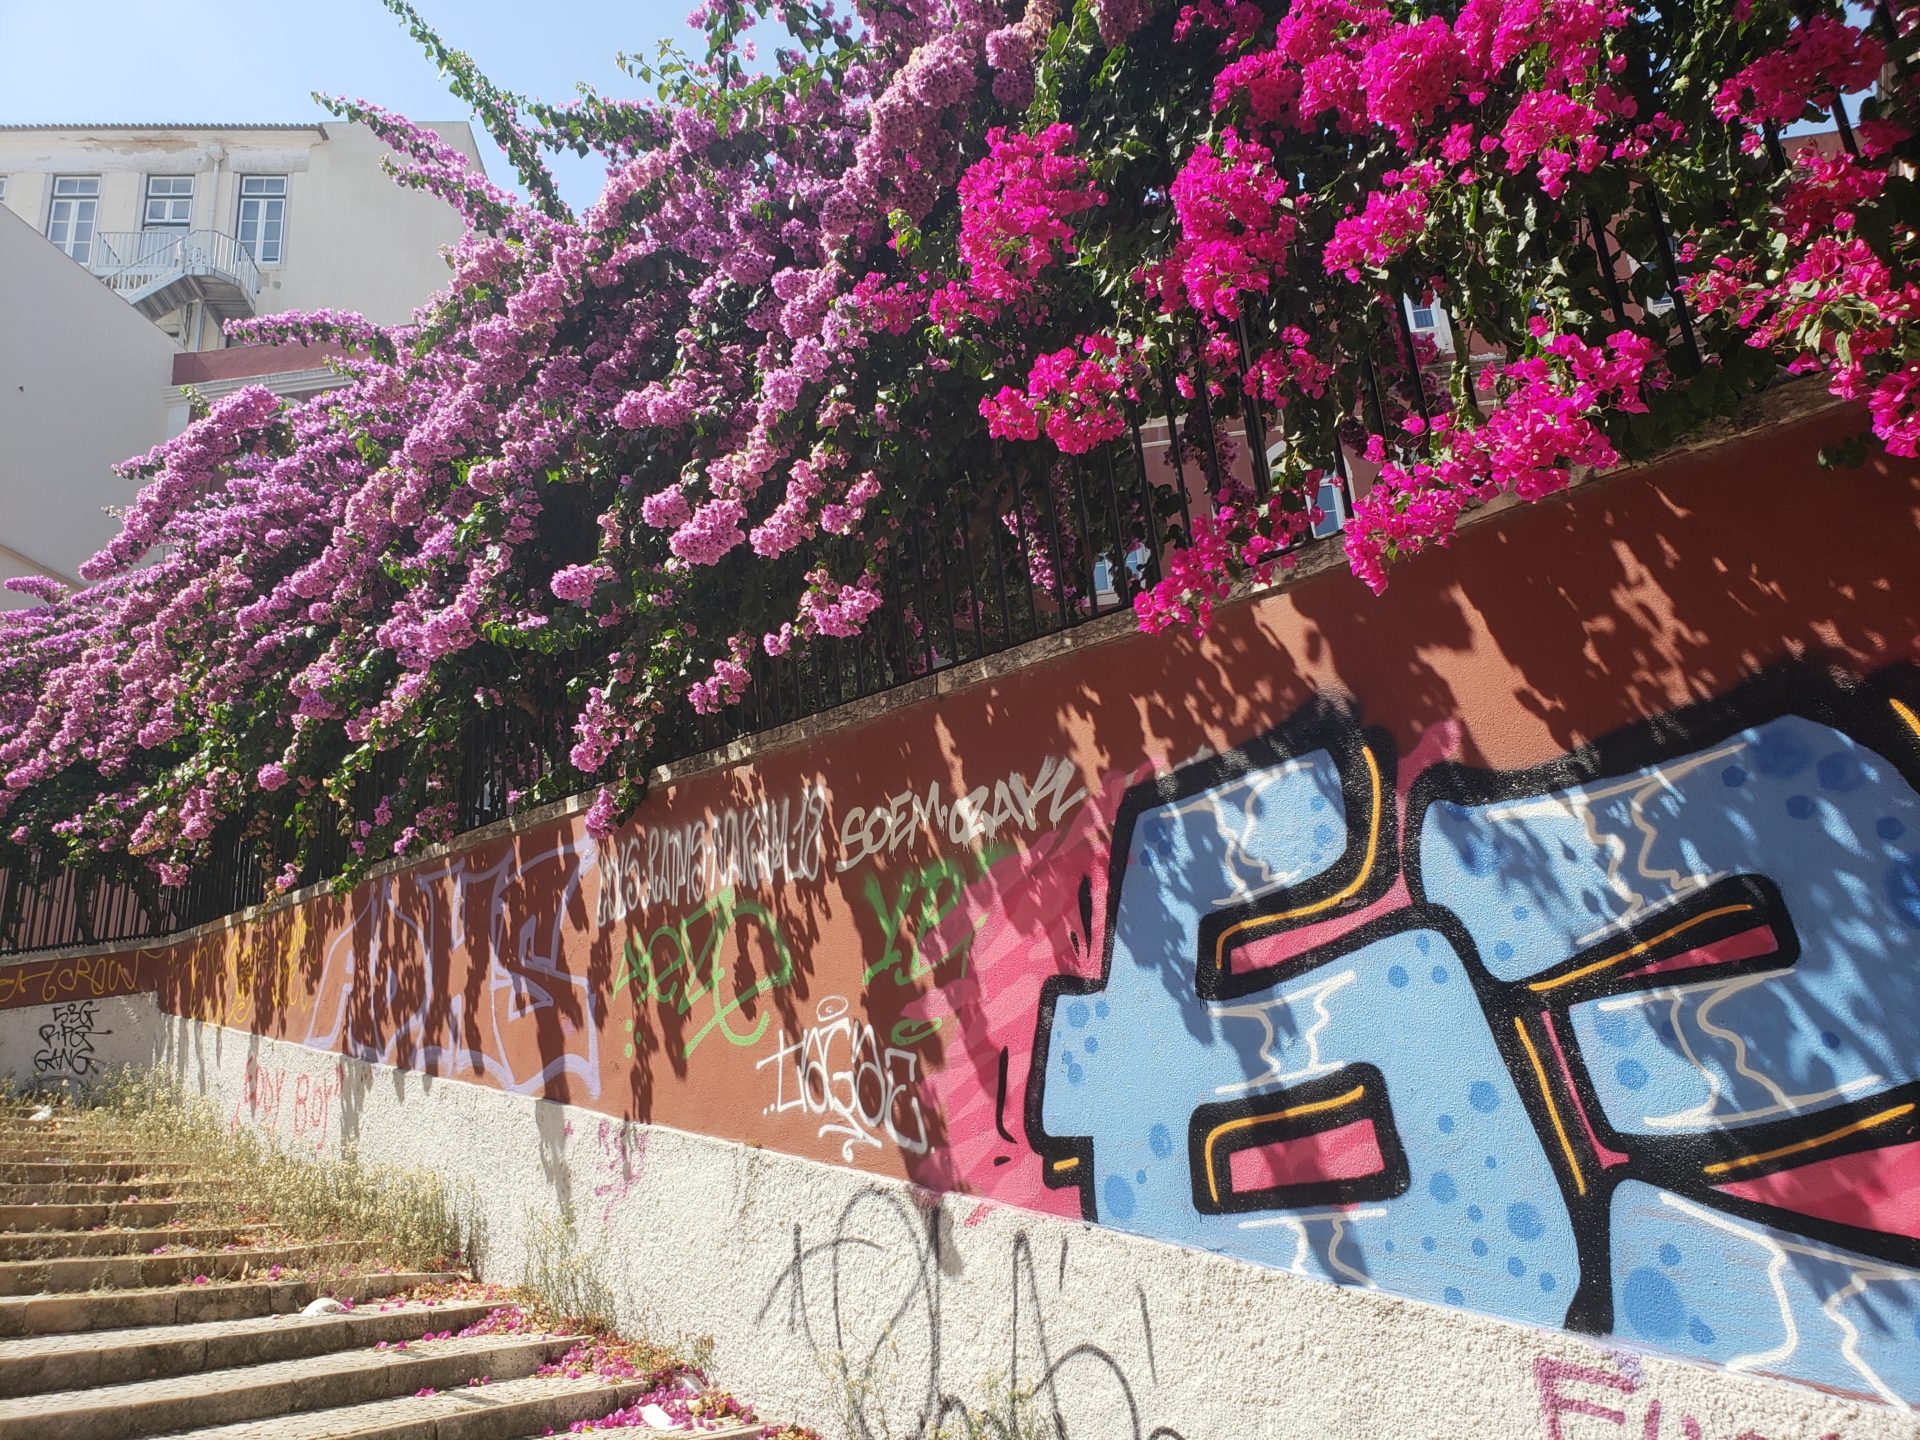 a wall with pink flowers and graffiti